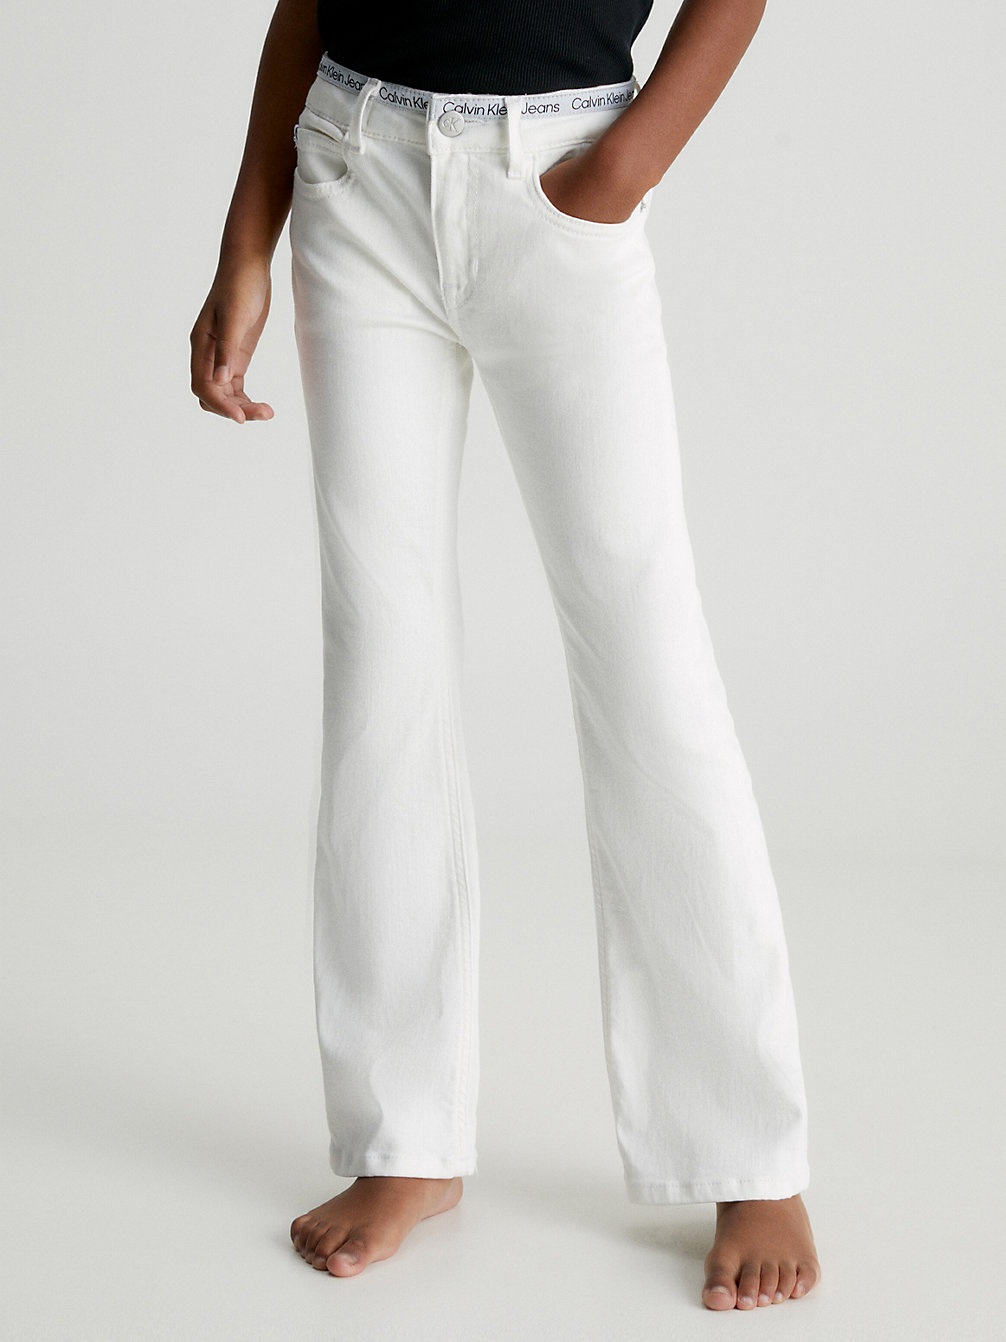 WHITE STRETCH TAPE Mid Rise Flared Jeans undefined girls Calvin Klein